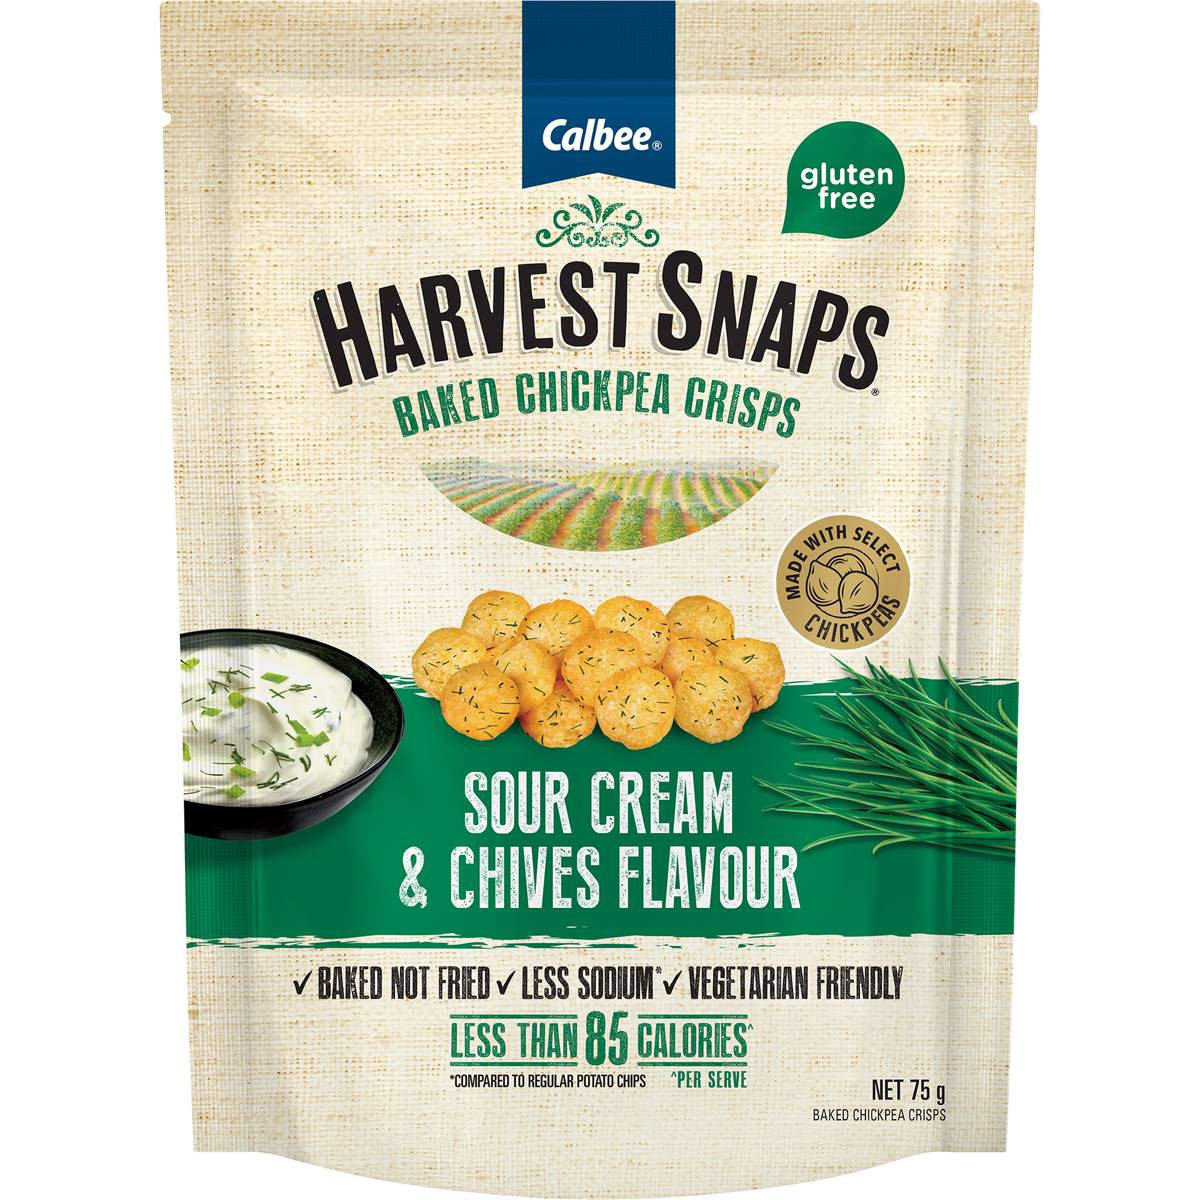 Calories in Calbee Harvest Snaps Chickpea Baked Crisps Sour Cream & Chives